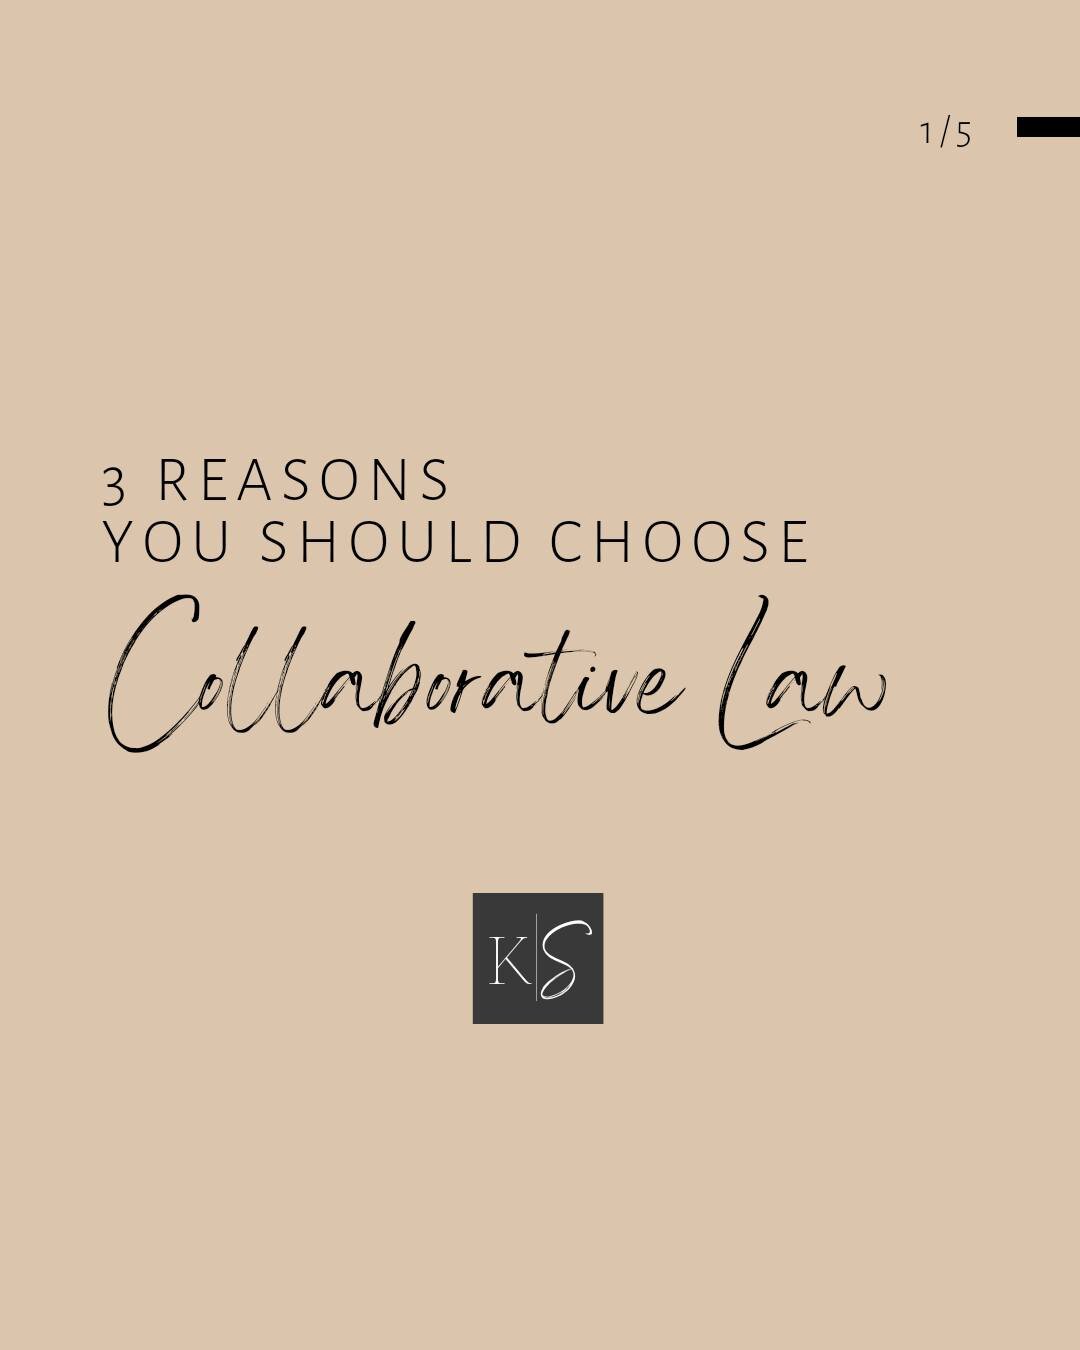 Choosing Collaborative Law means choosing a process that is client-centred, efficient and respectful, with the goal of achieving sustainable solutions that benefit everyone involved. 

Want a heart-centred lawyer to help you avoid the stress, expense